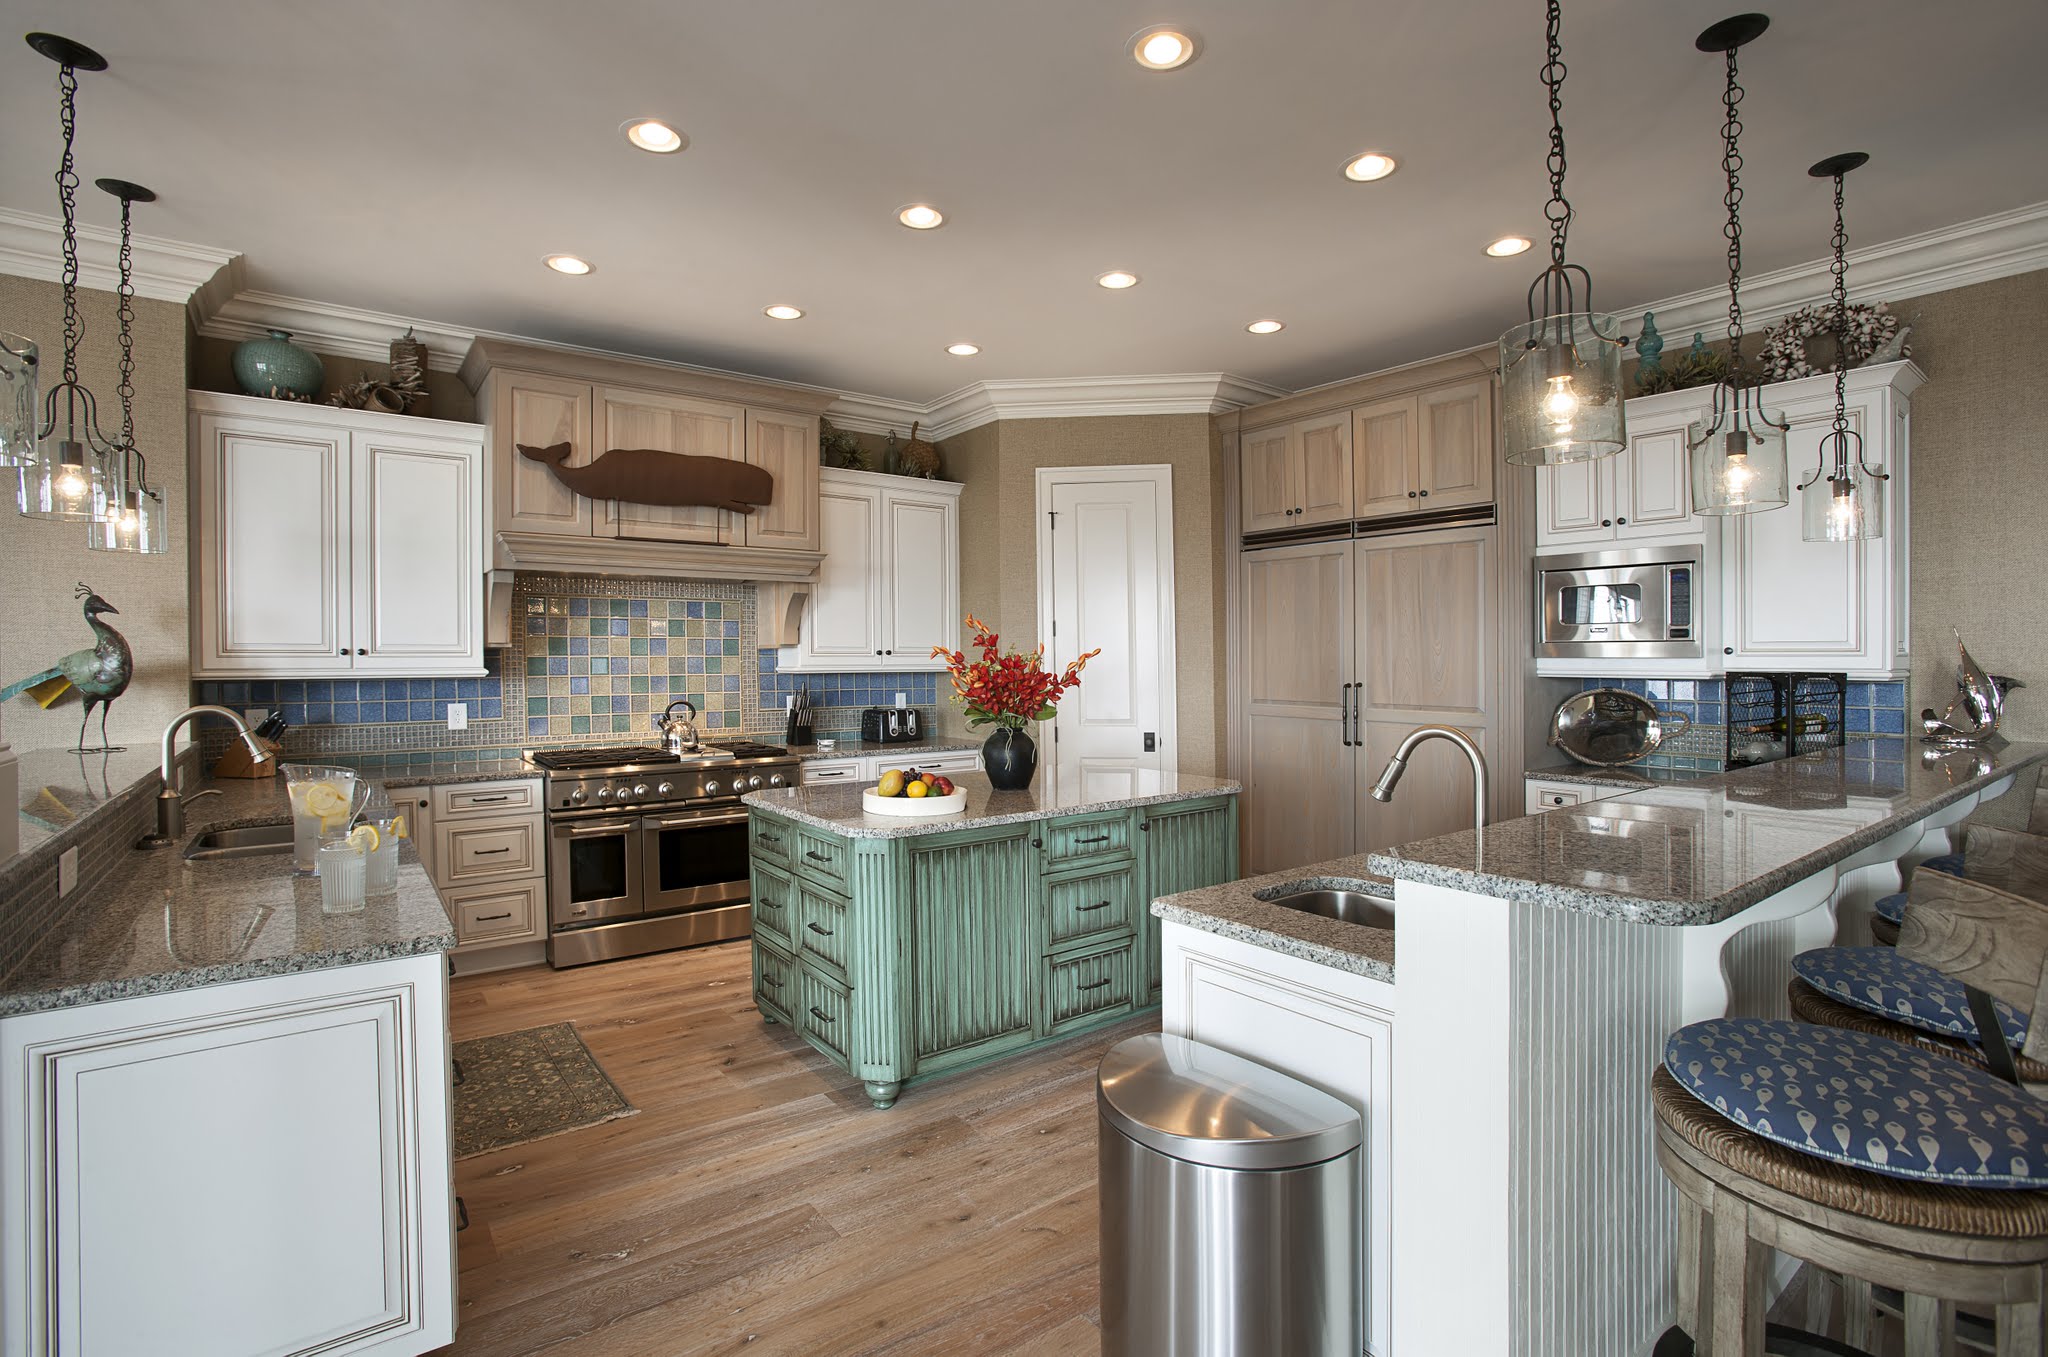 5 Ideas for Kitchen Remodeling